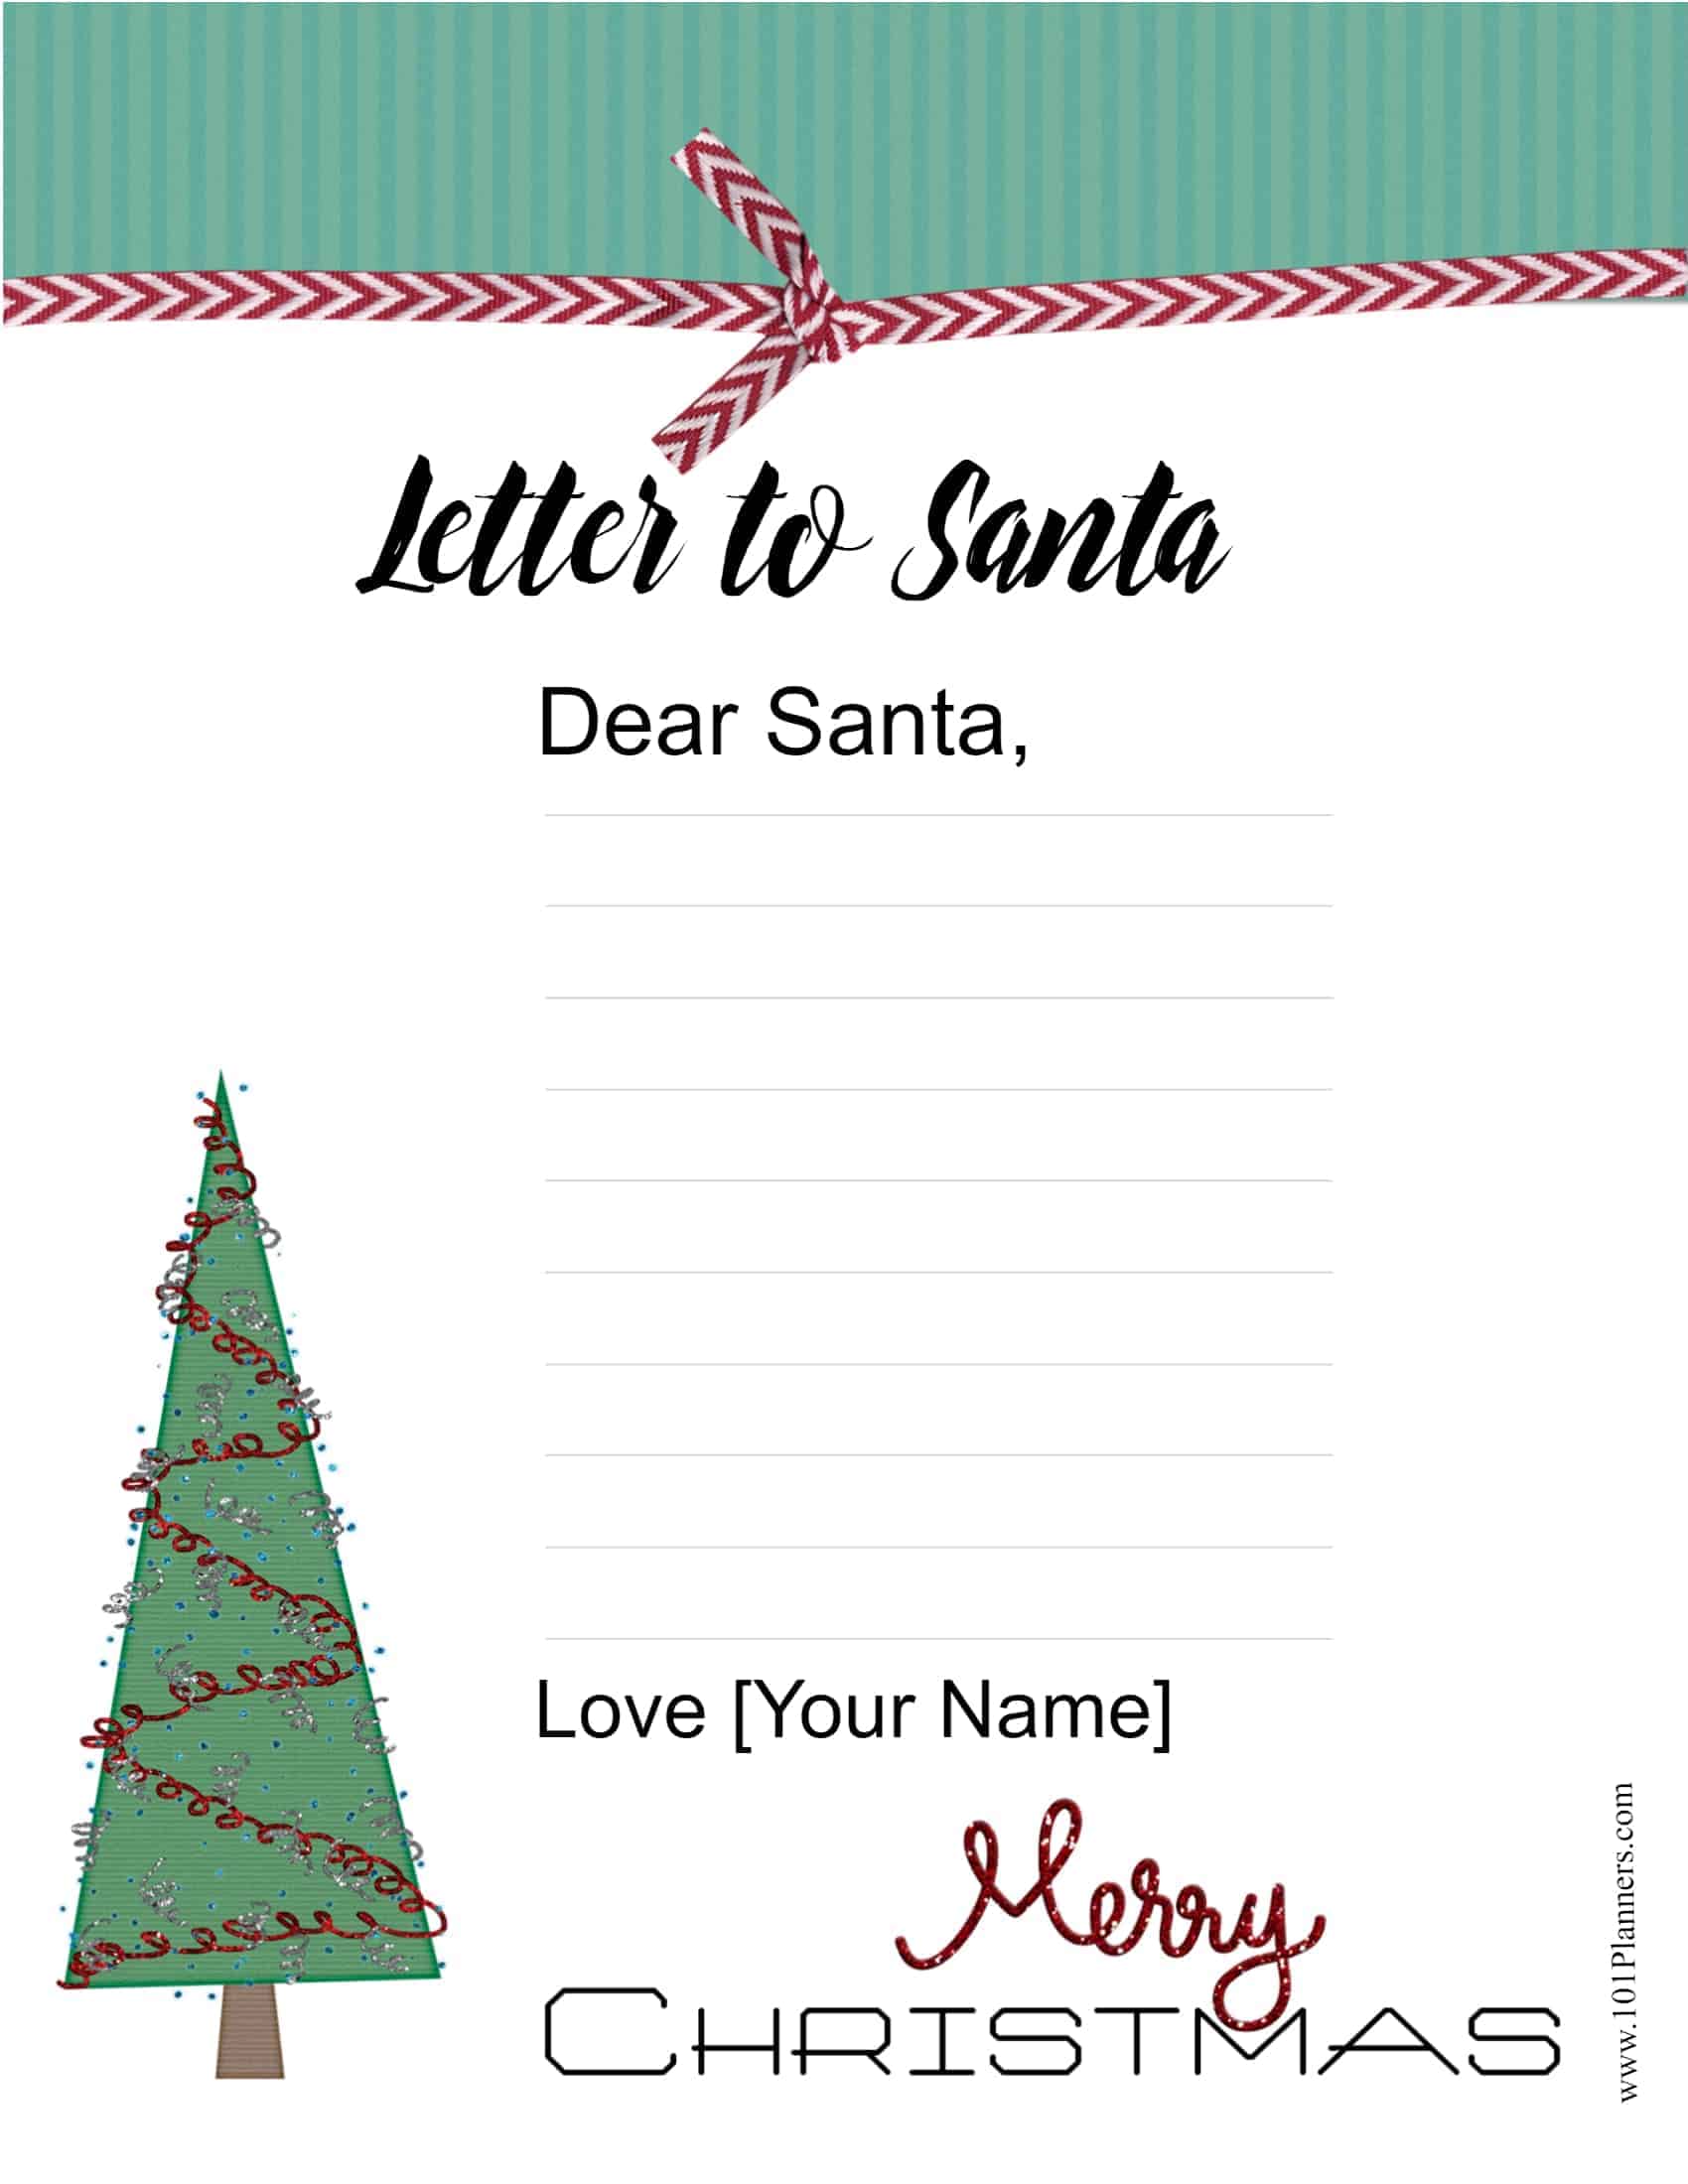 free-letter-to-santa-template-customize-online-then-print